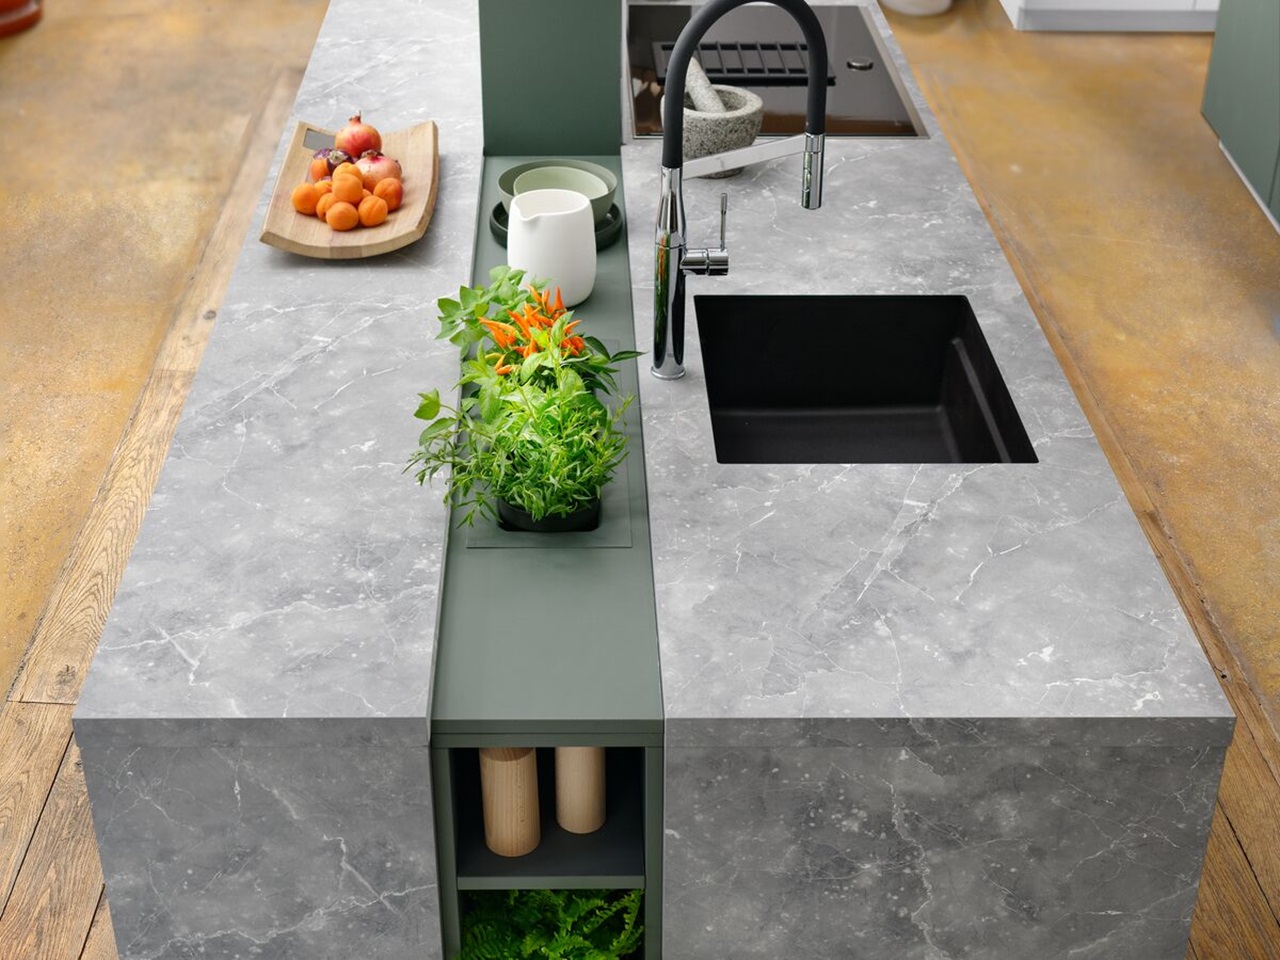 Kitchen island with concrete appearance and central planter